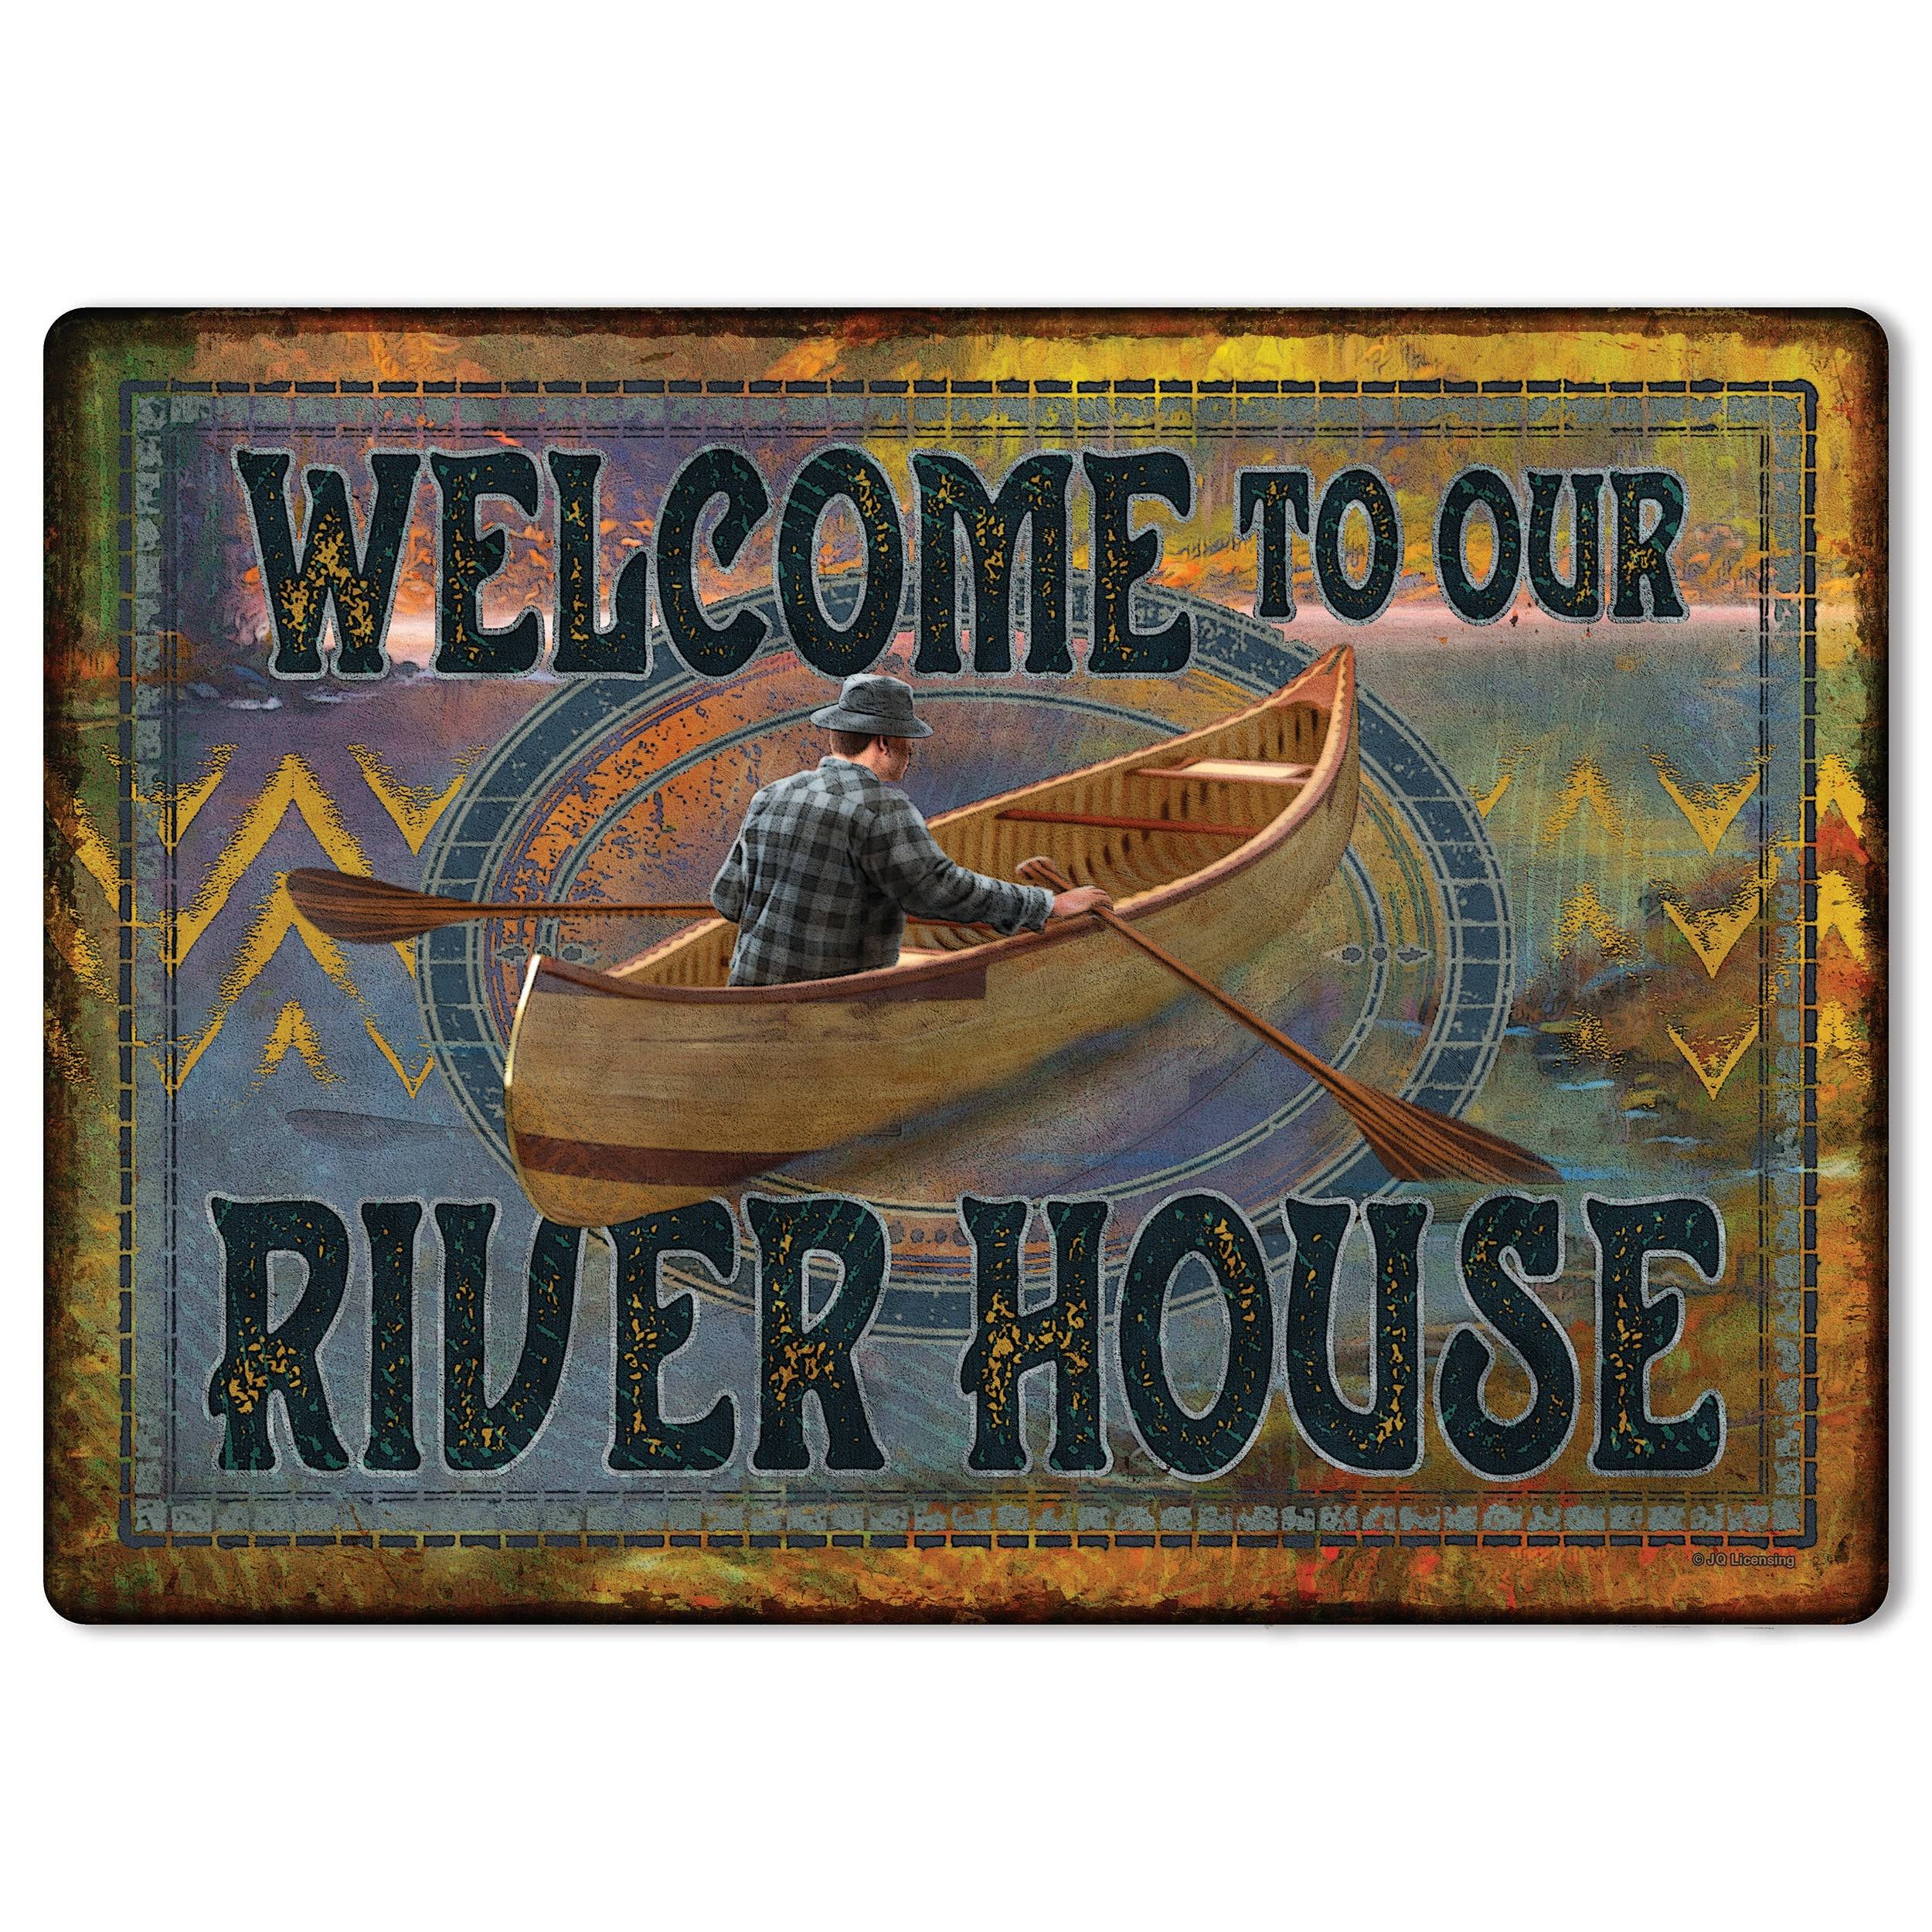 River S Edge Products Tin Sign 12in x 17in River House